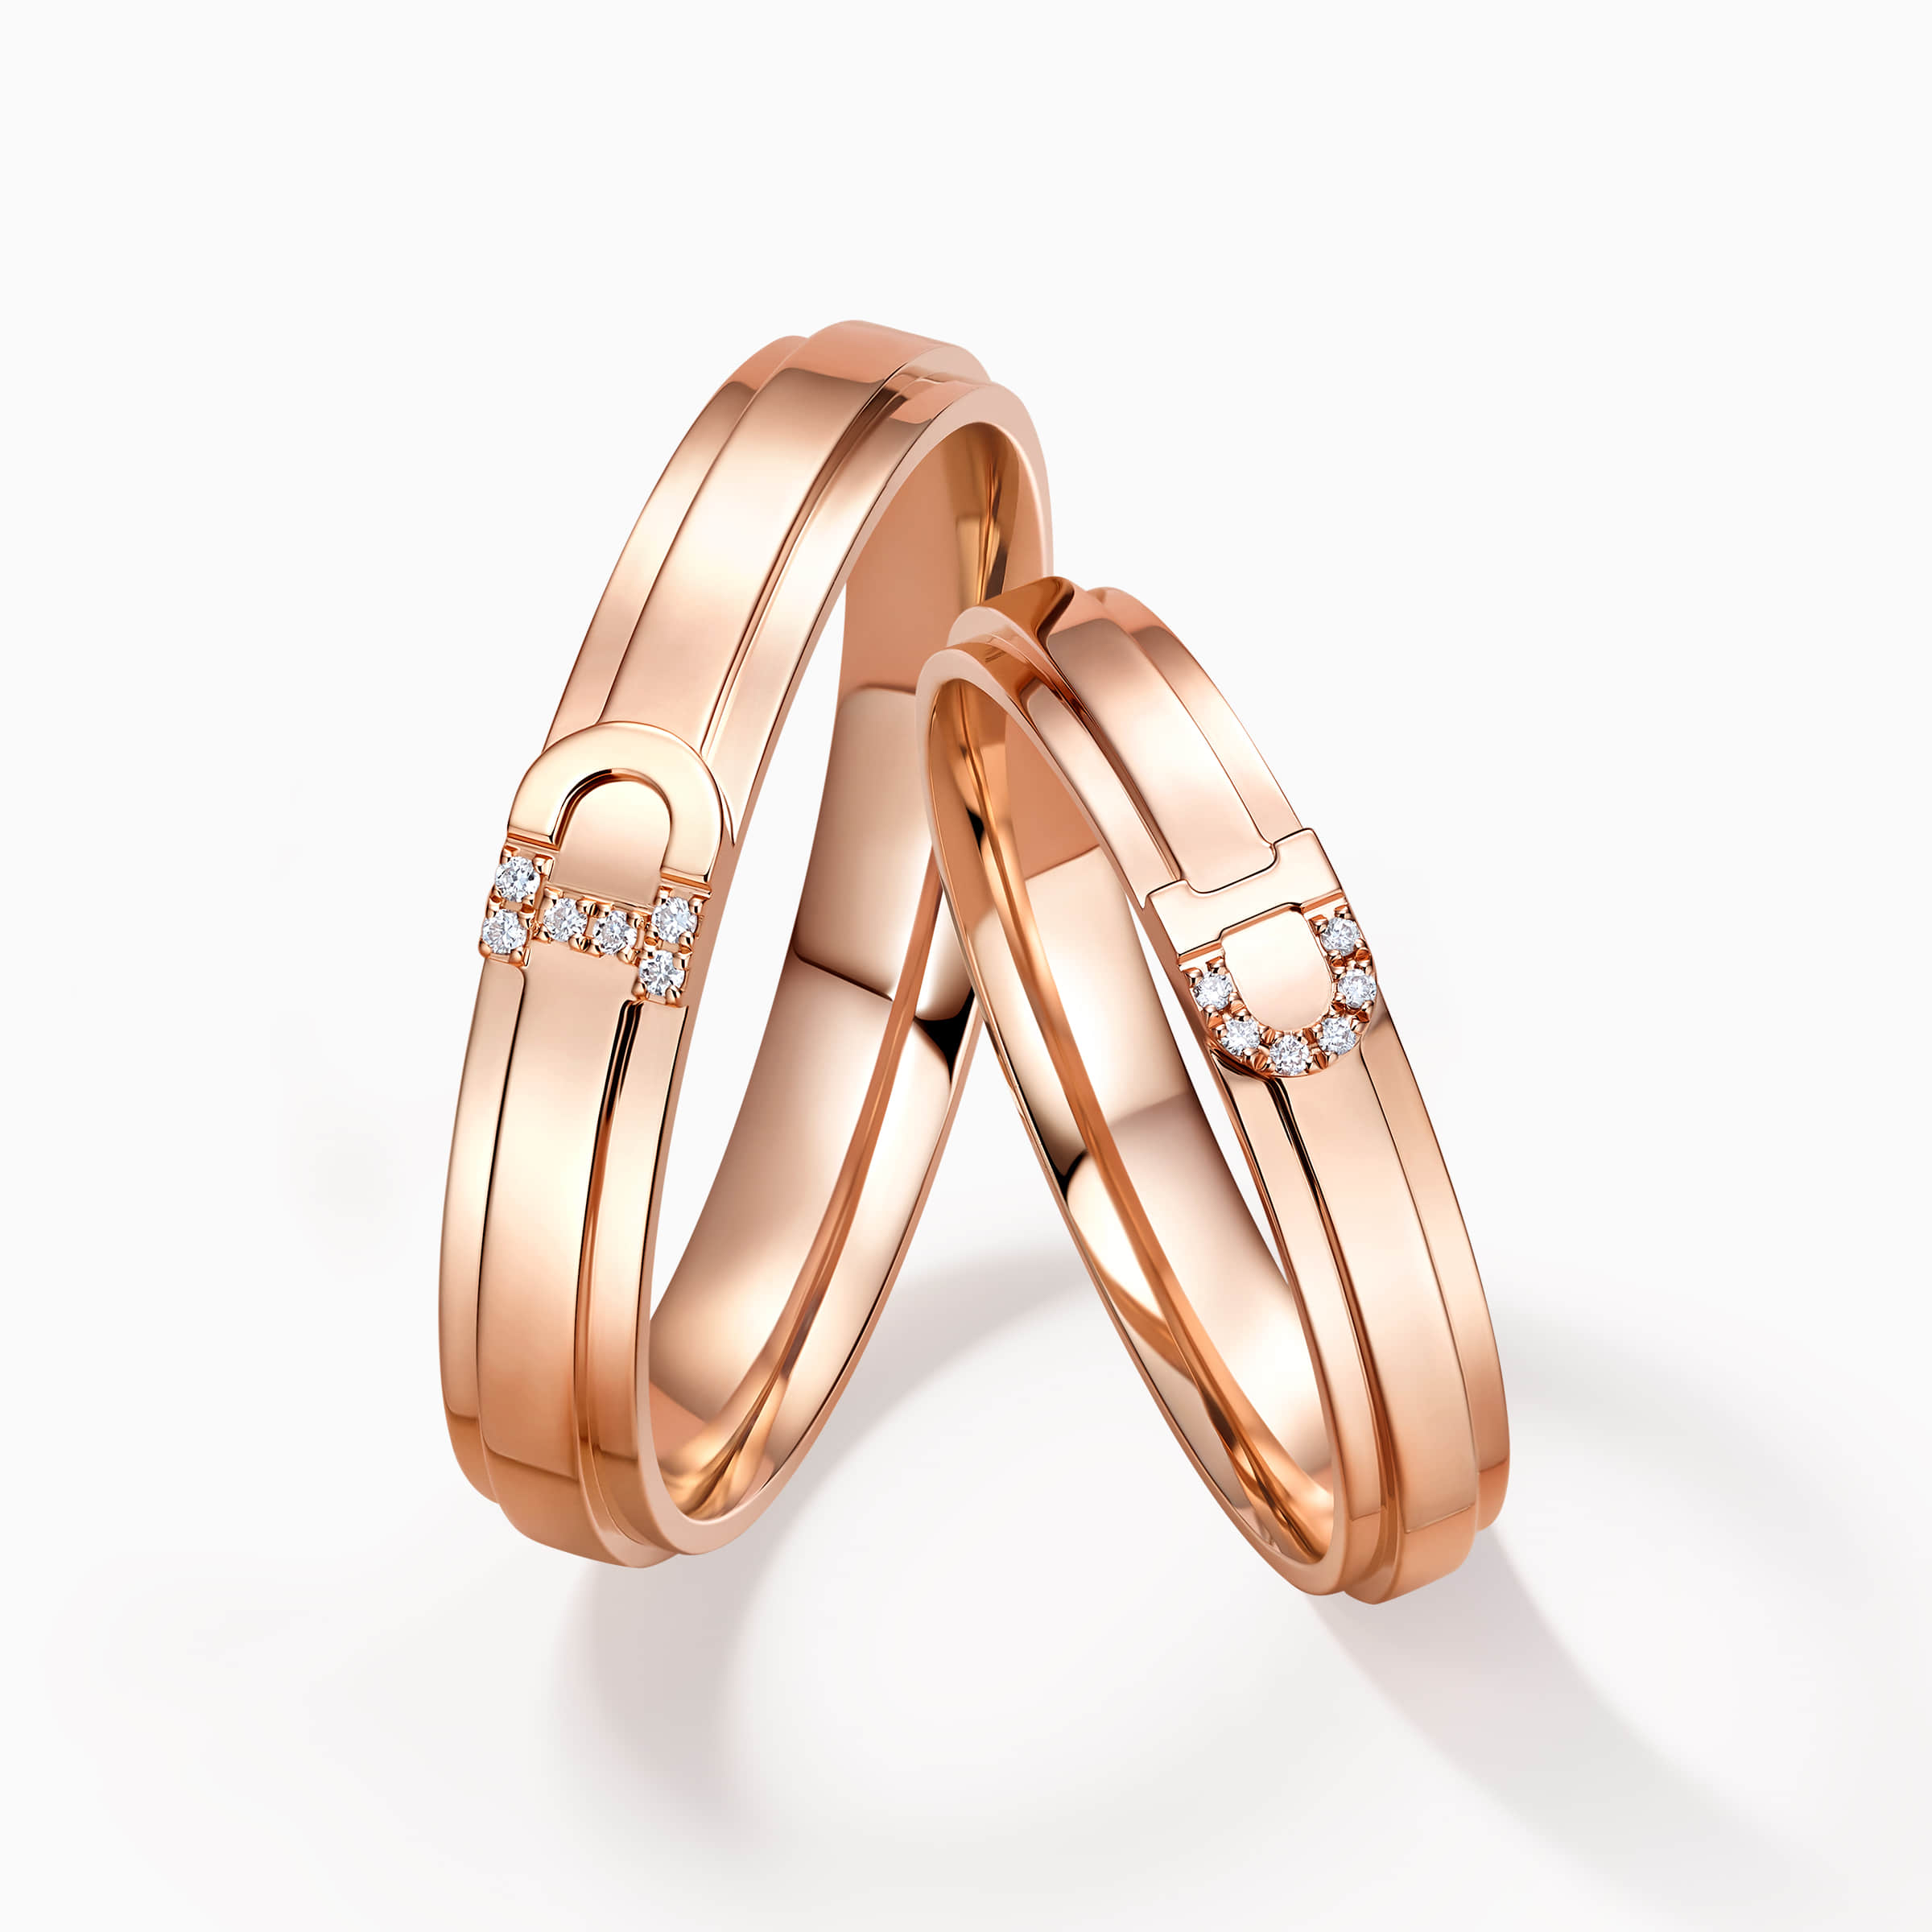 Adoration 18 KT Rose Gold Couple Rings